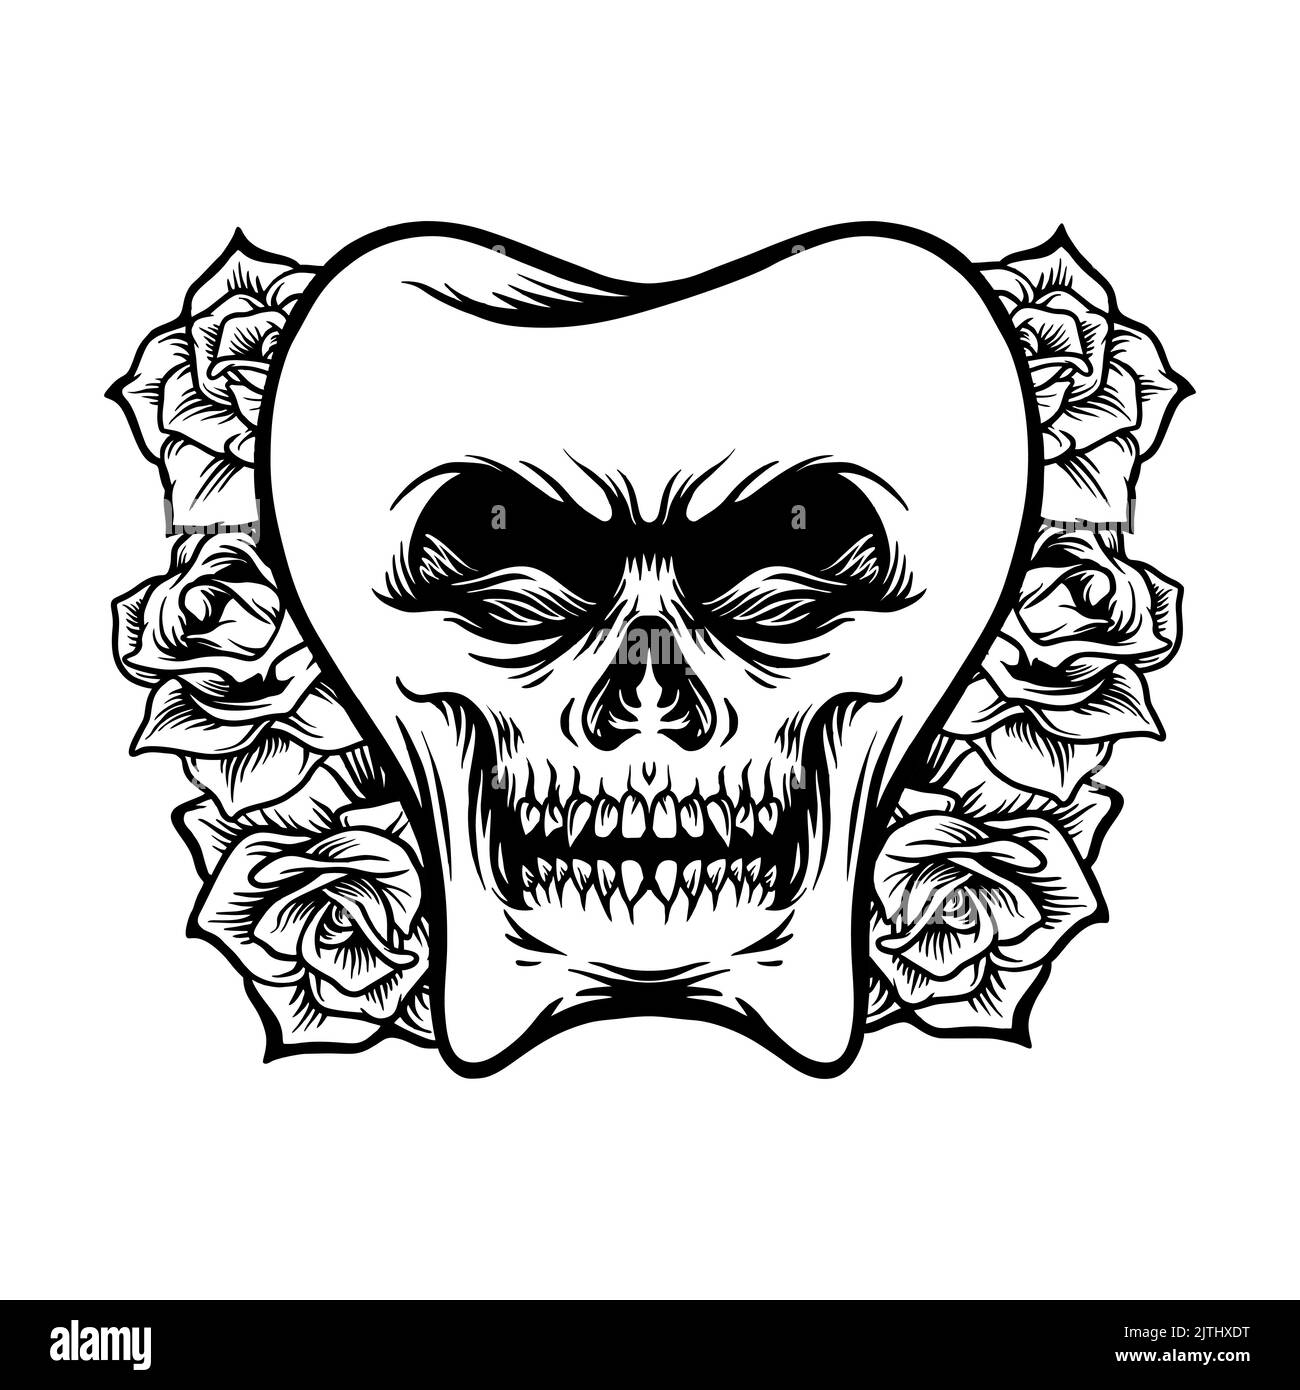 Skull rose Black and White Stock Photos & Images - Alamy